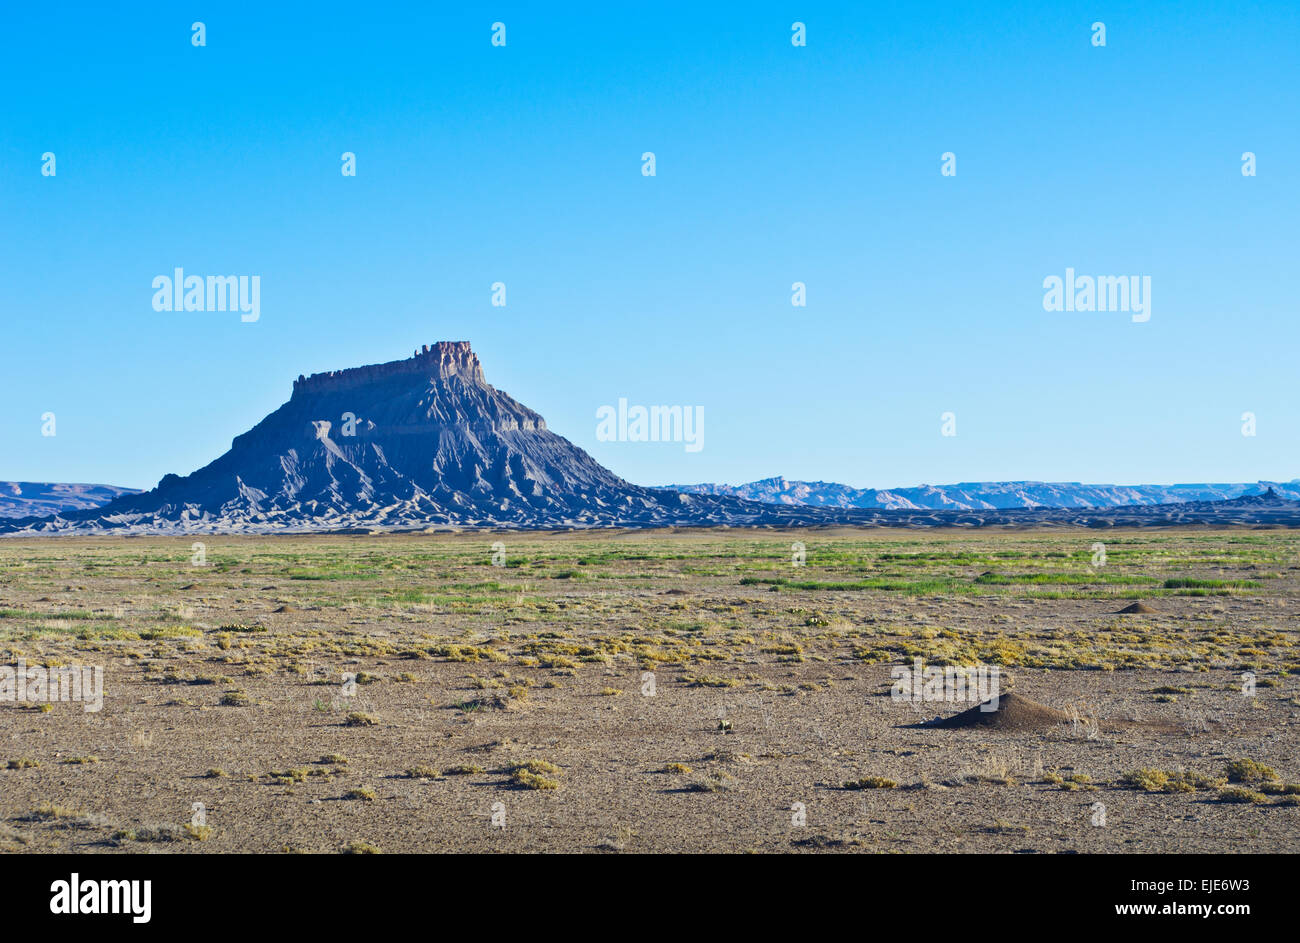 Factory Butte, a massive butte rising above the desert in Utah, near Hanksville, in the United States. Stock Photo